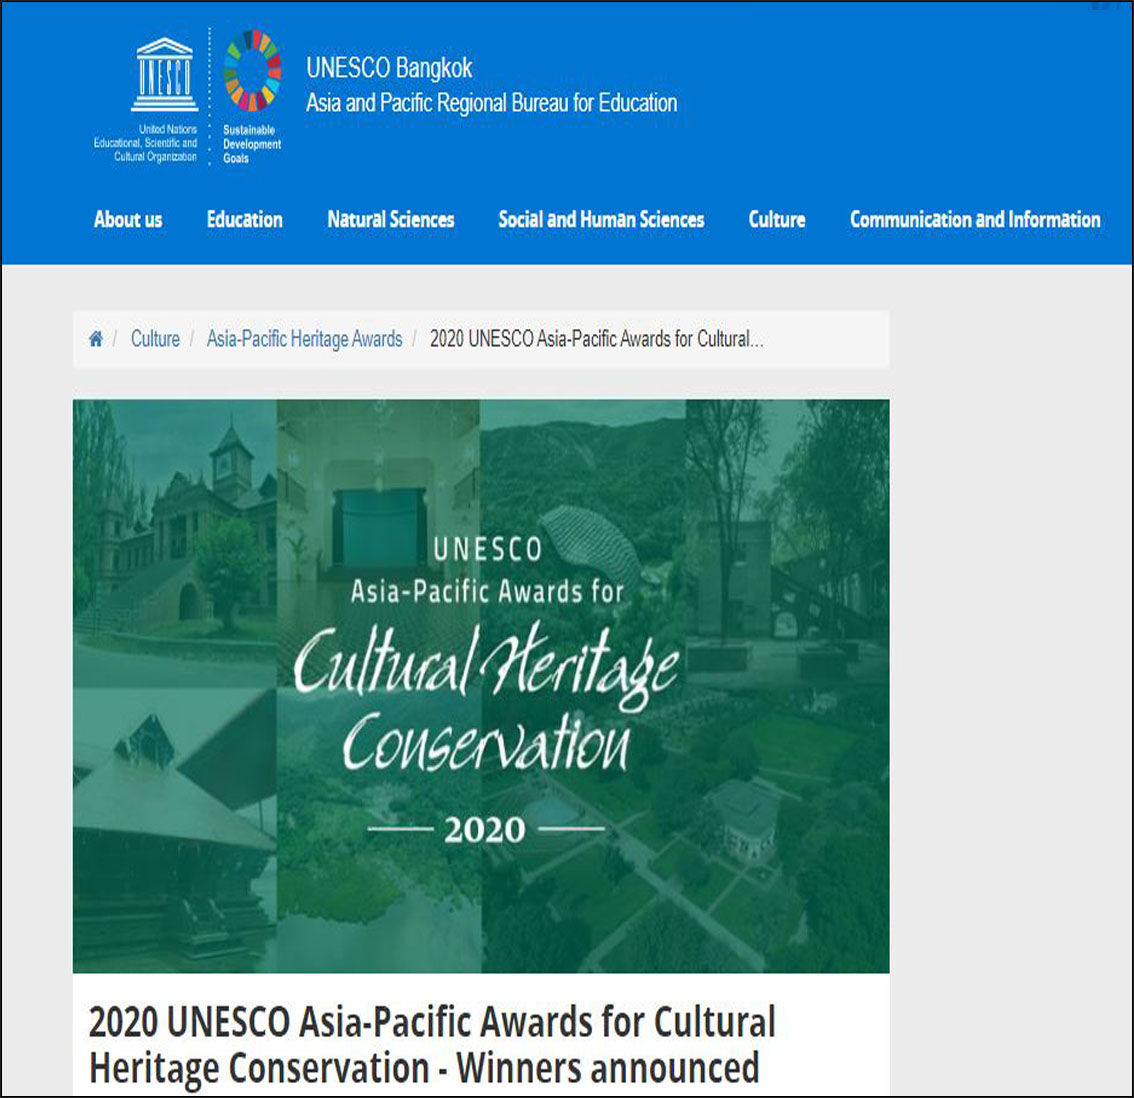 2020 UNESCO Asia-Pacific Awards for Cultural Heritage Conservation - Winners announced